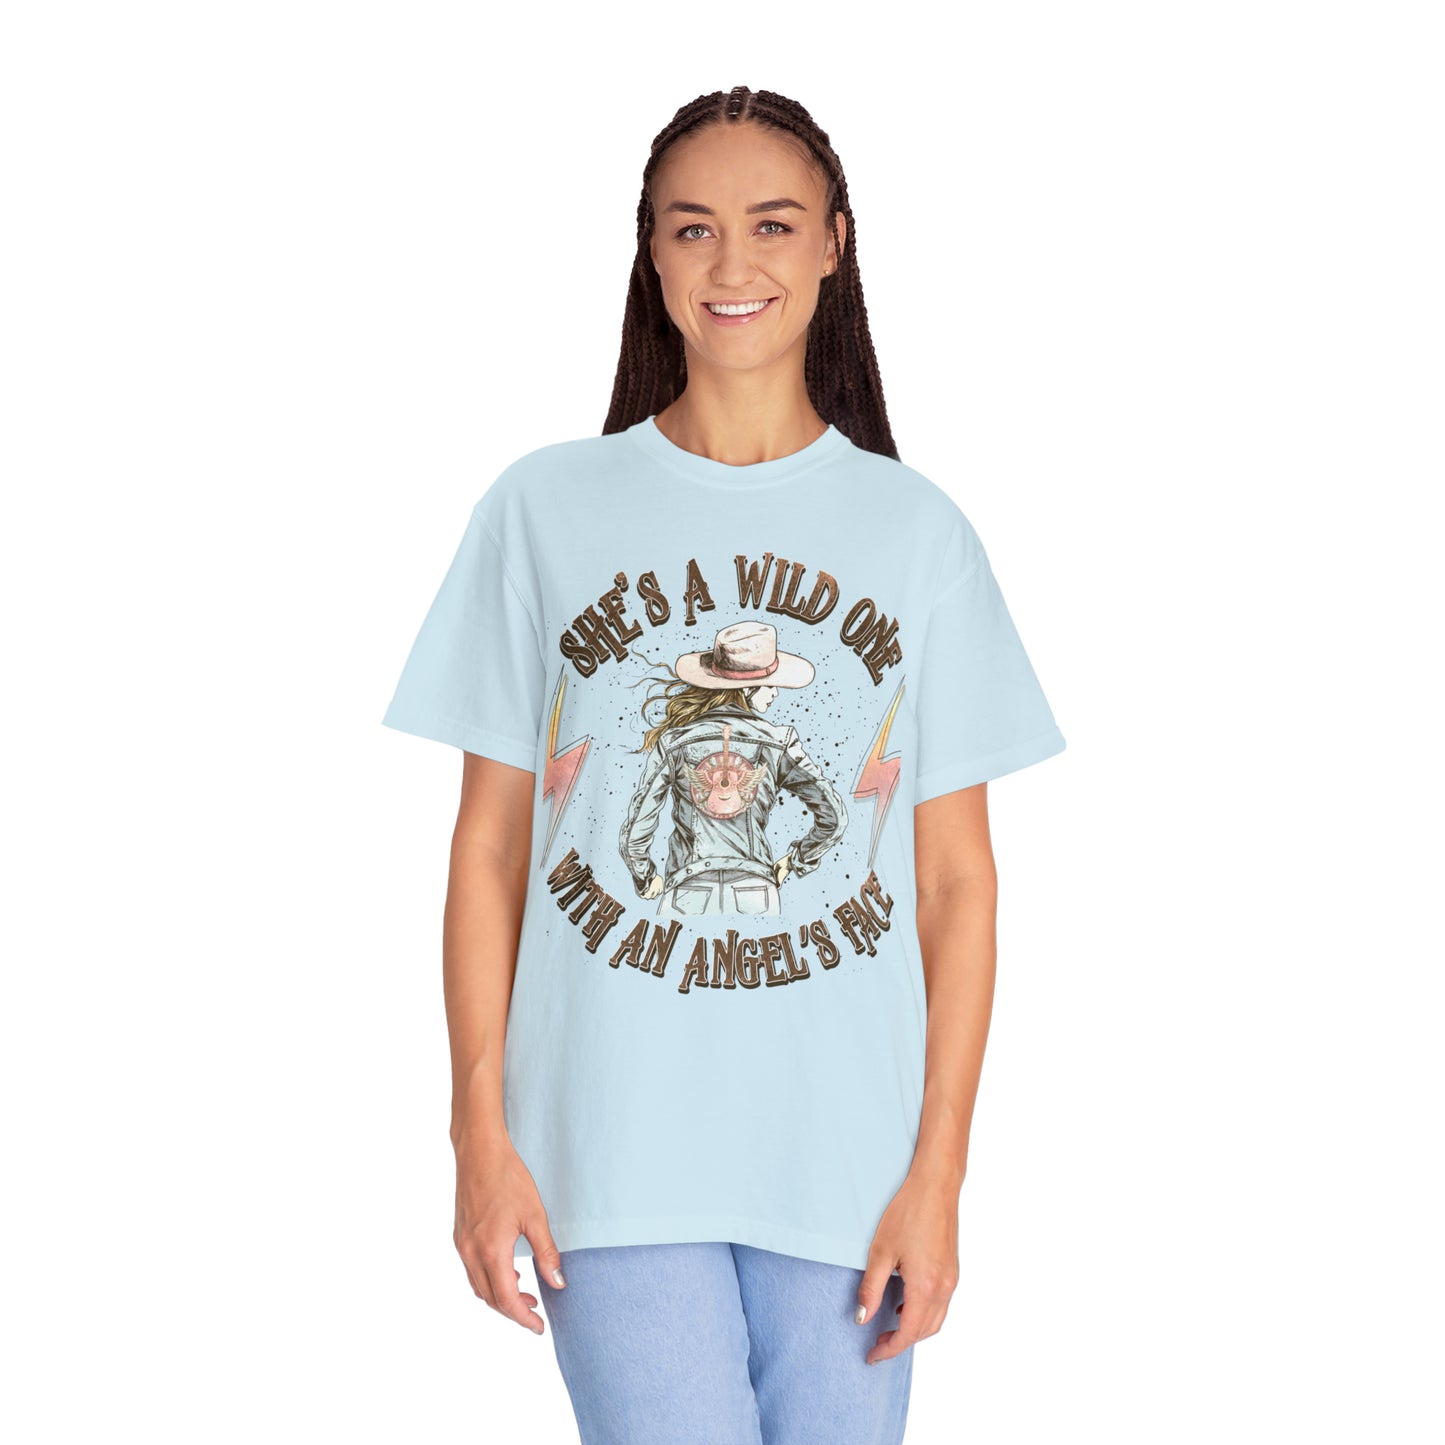 She's a wild one Unisex Garment-Dyed T-shirt